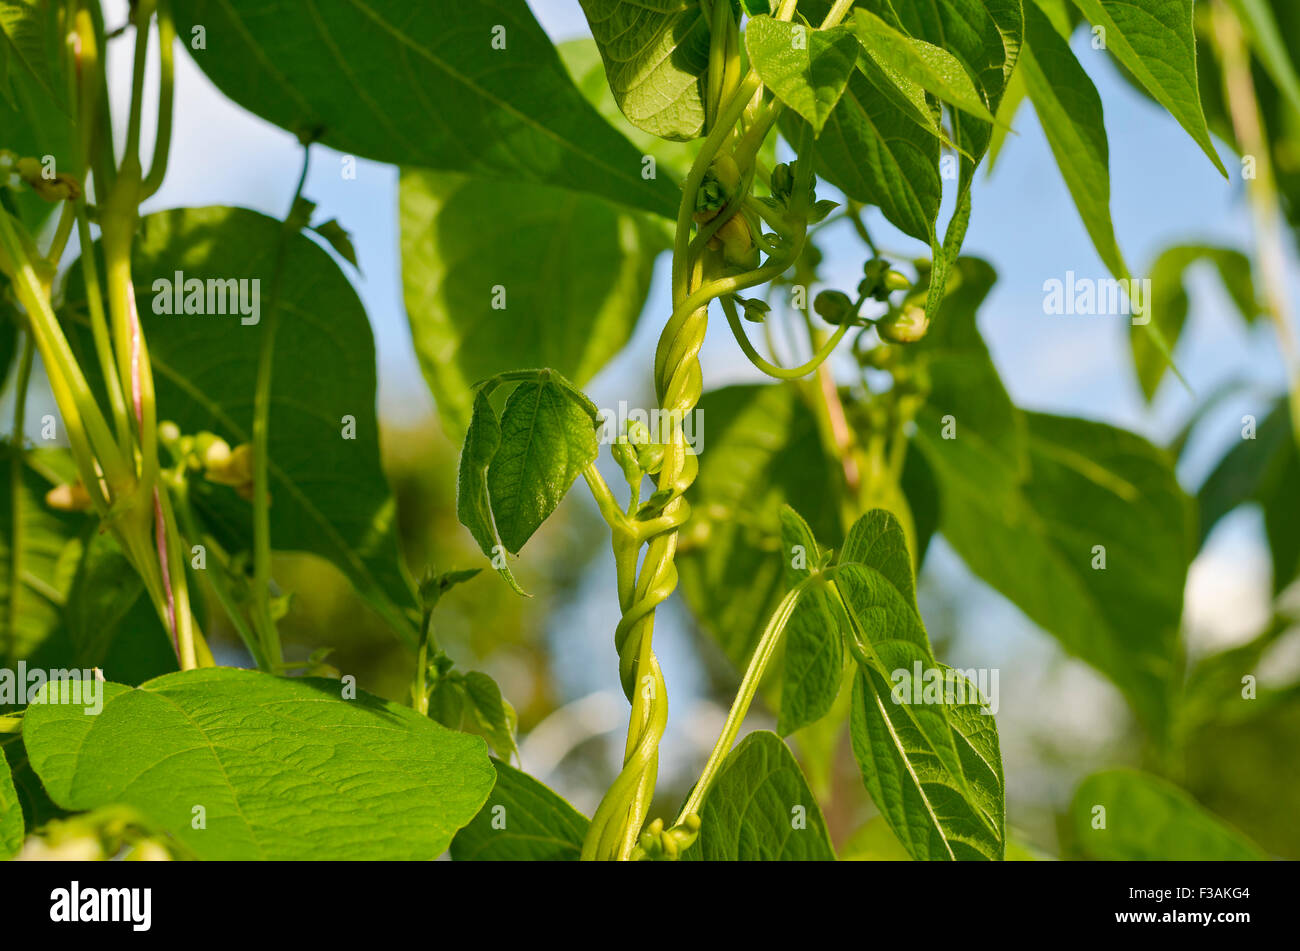 Young stalks of a string bean in the garden Stock Photo